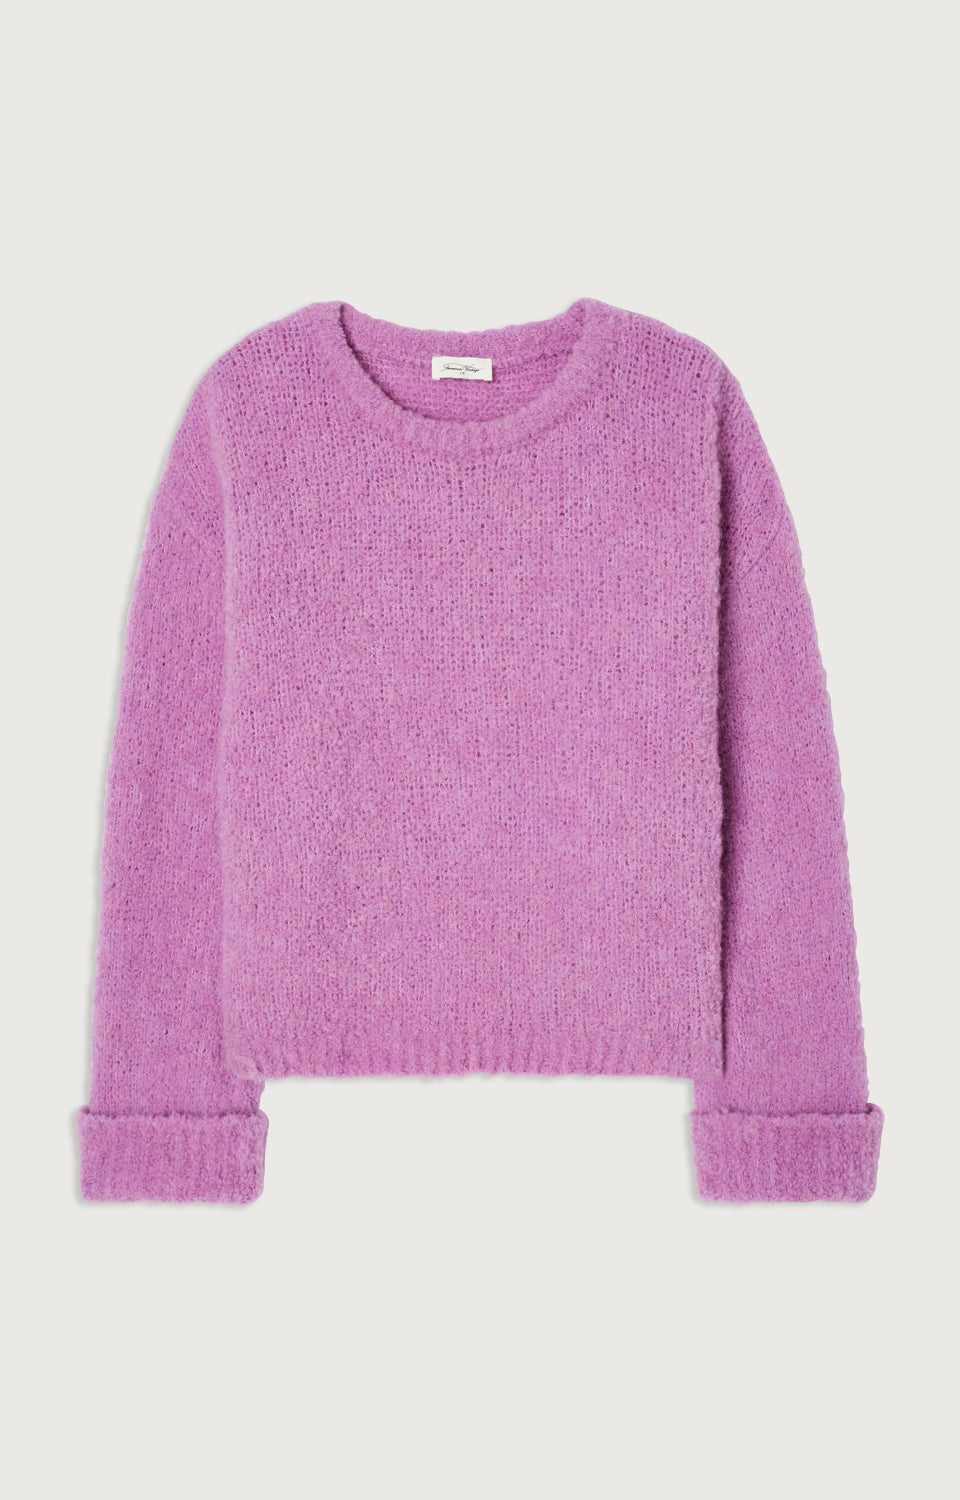 American Vintage Zolly Pullover